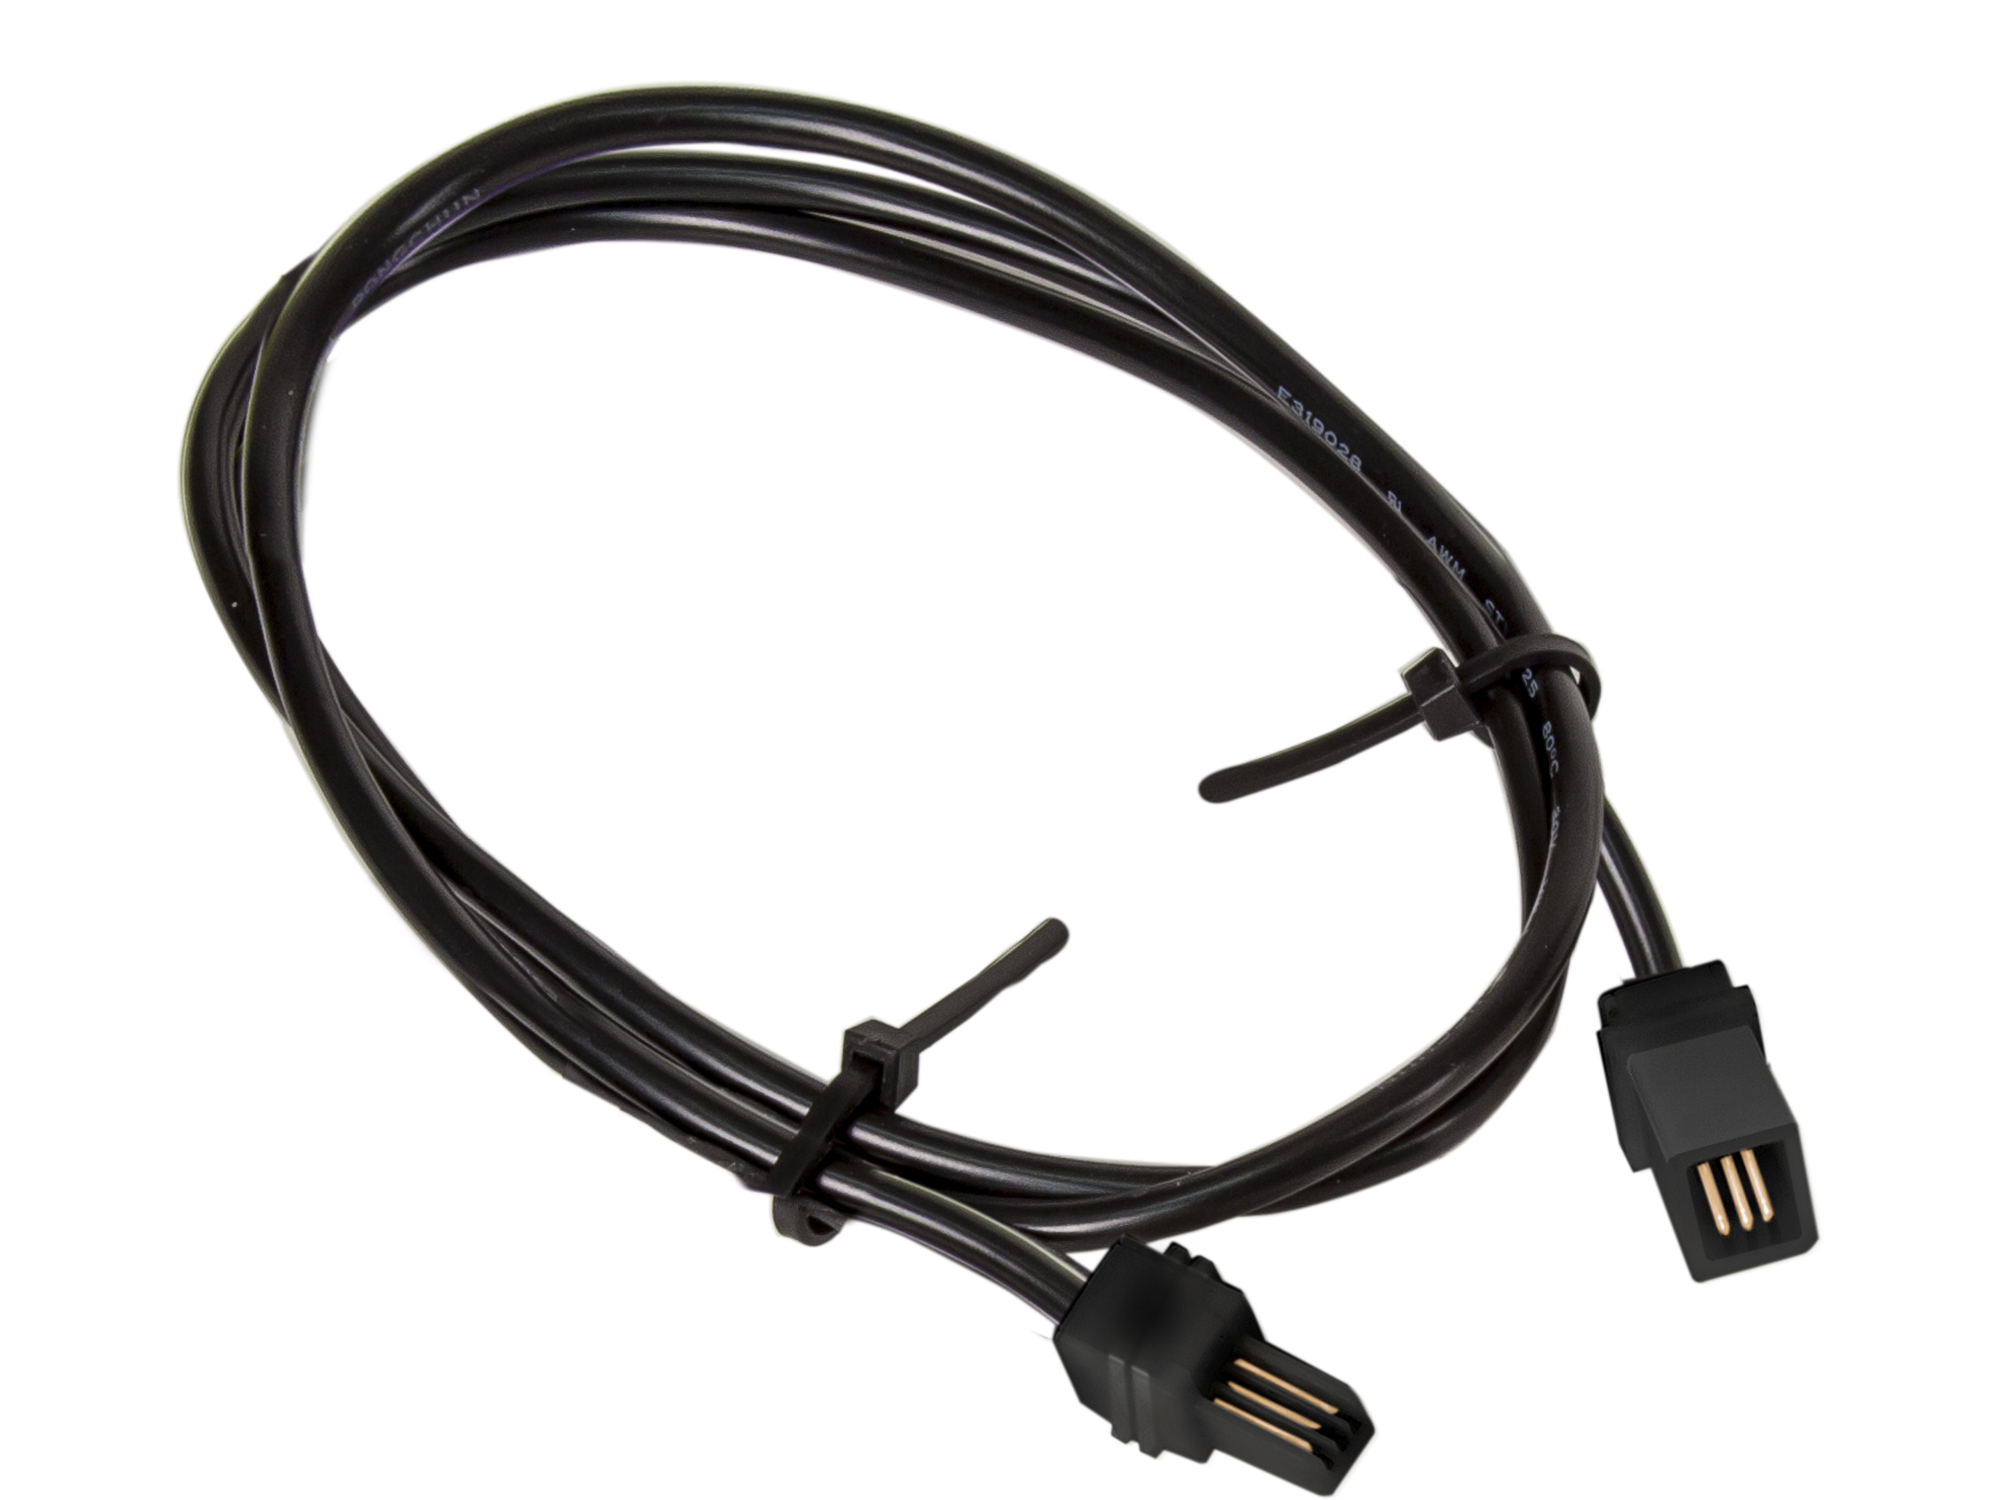 Lionel 682043 O Plug-Expand-Play Power Cable Extension 3 Pin 6'